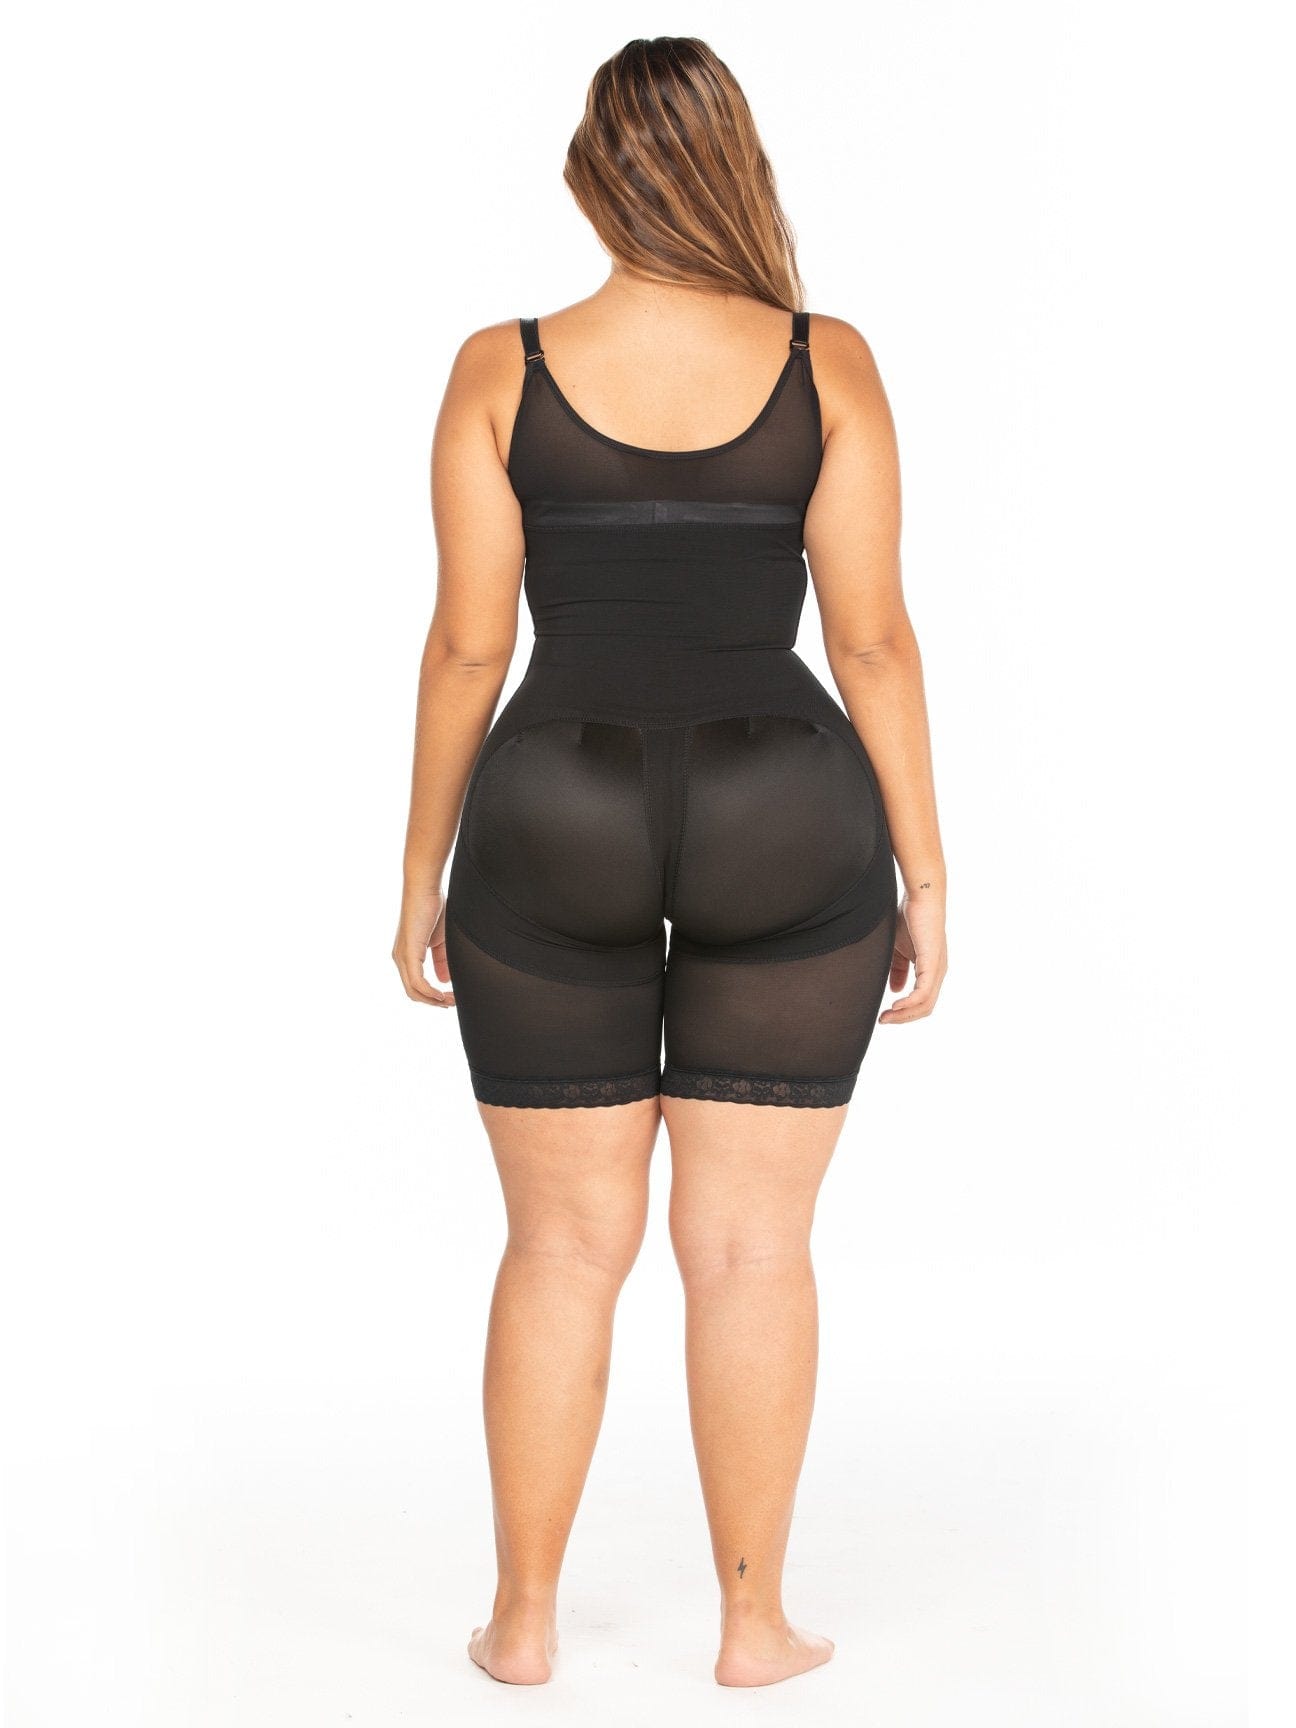 back view curvy latina wearing high compression body shaper faja with butt lifter and vest